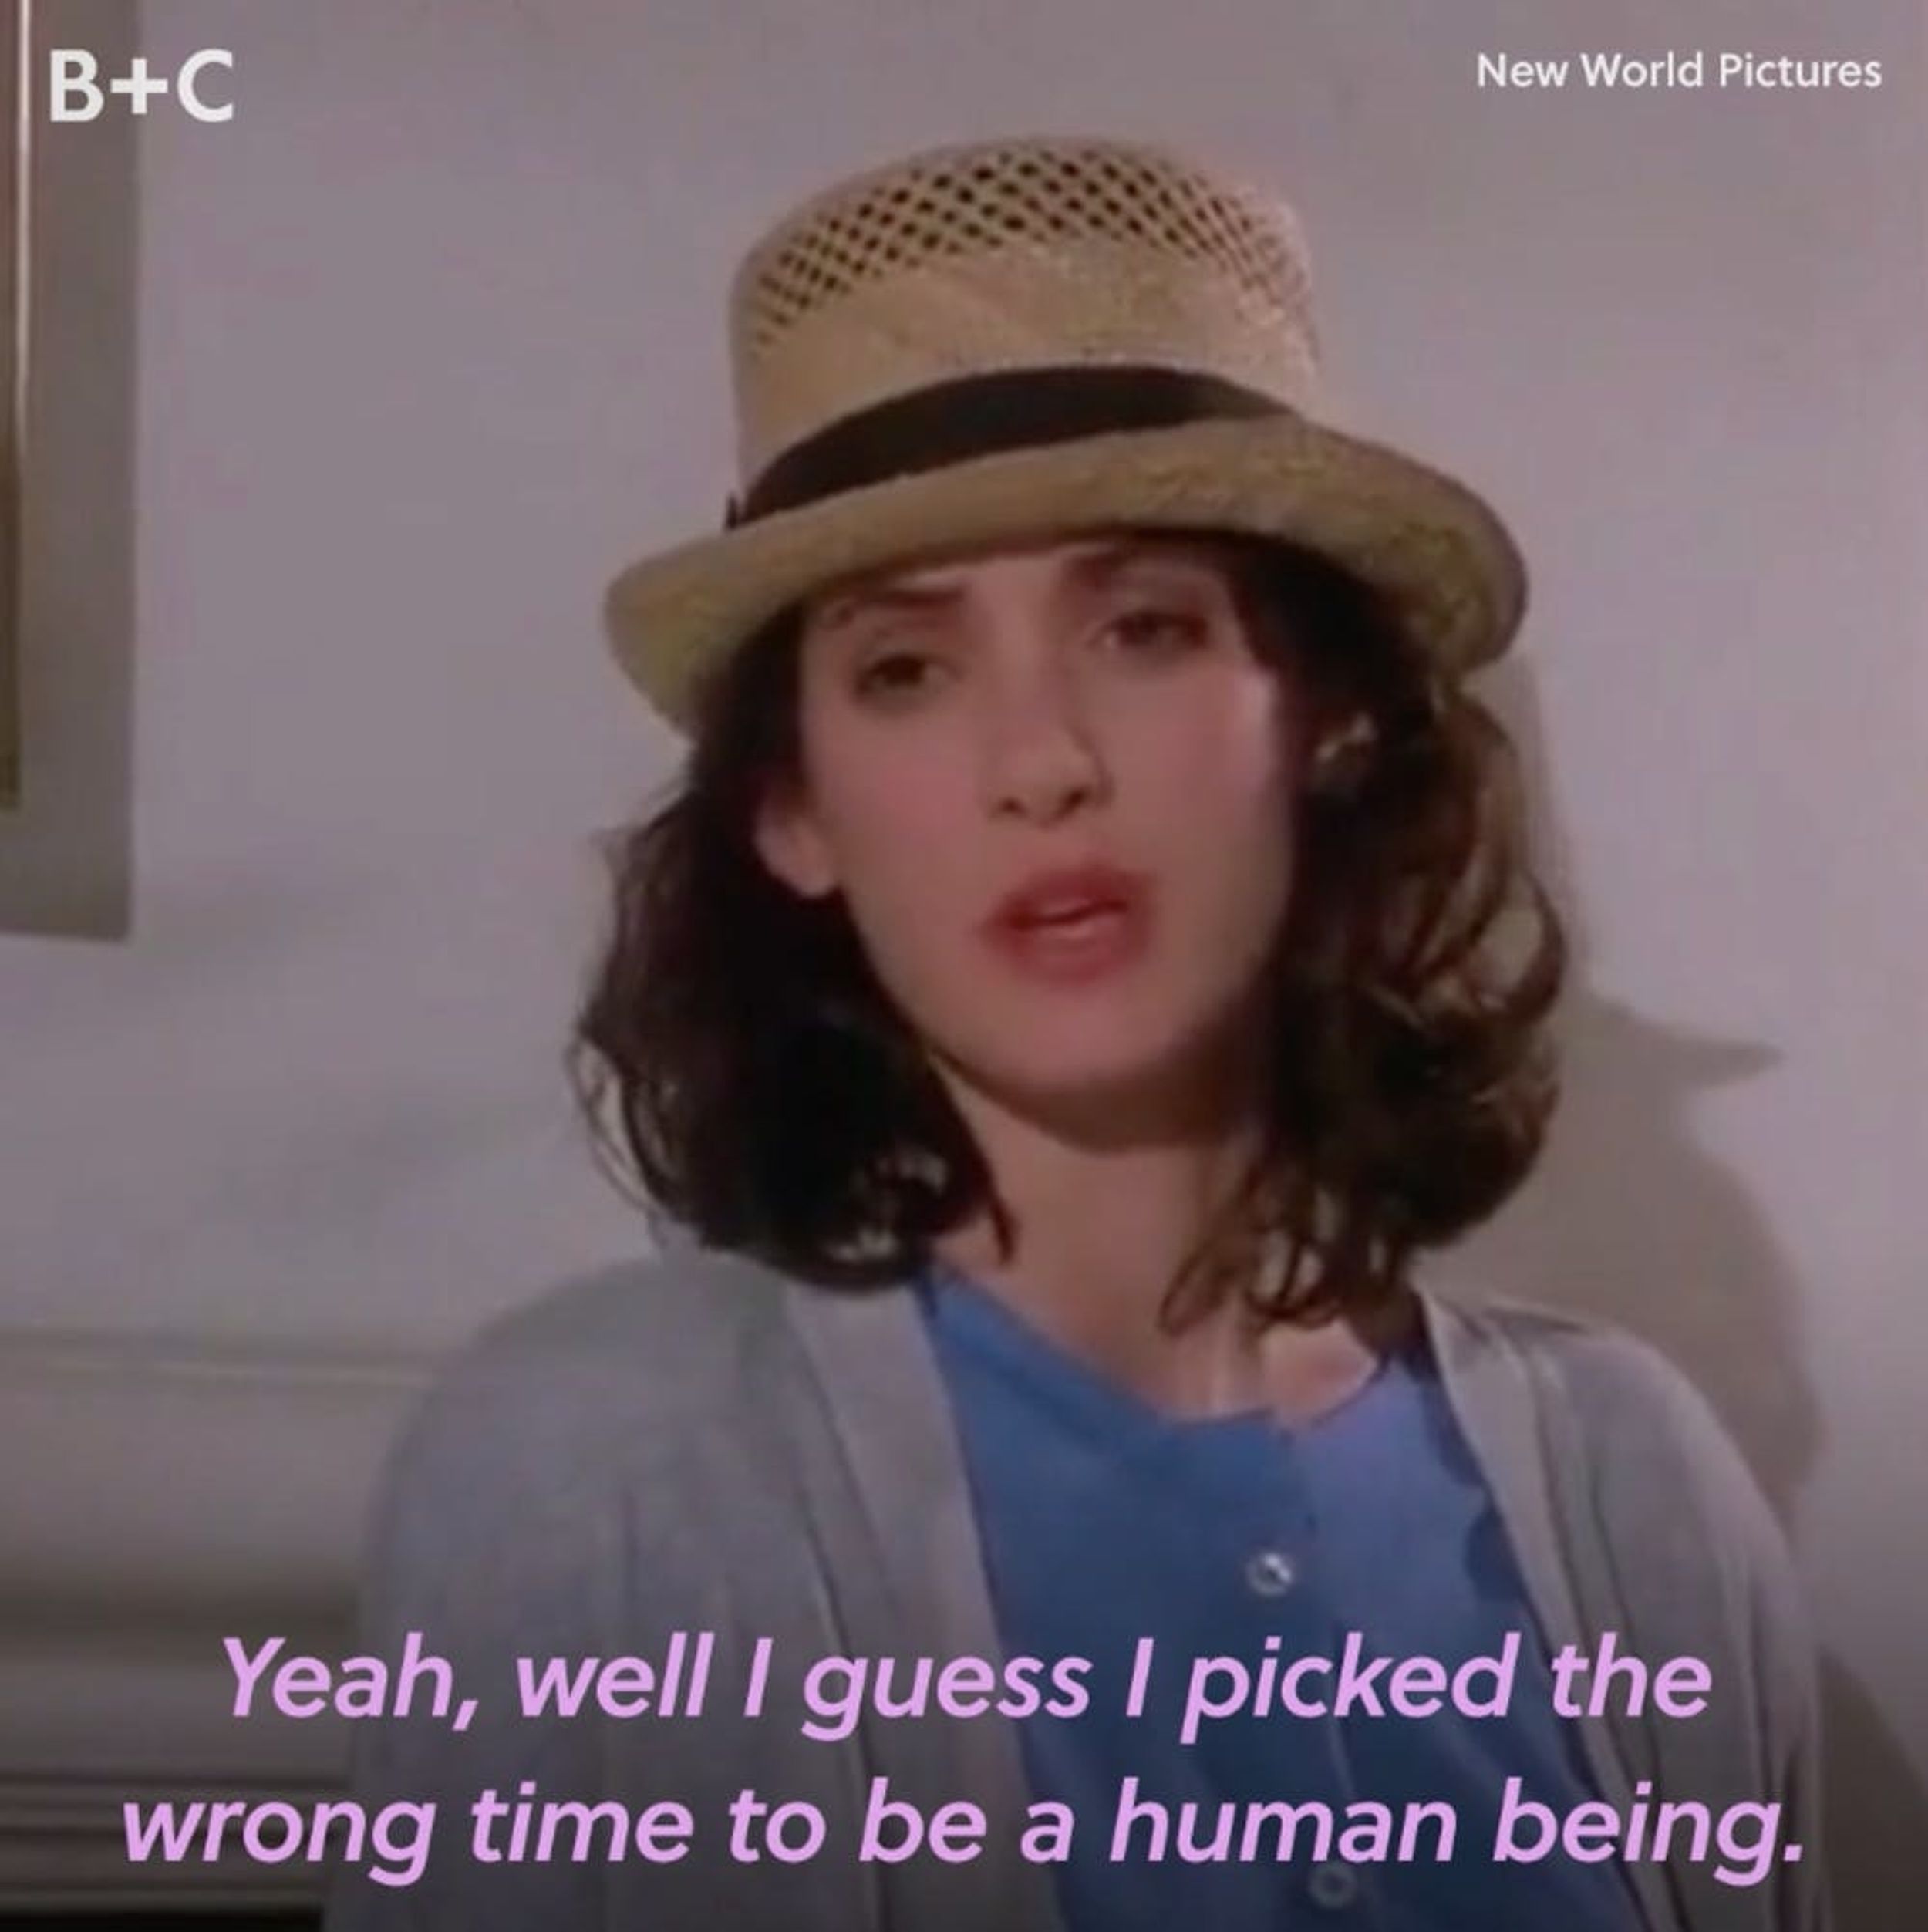 TBH, These Classic Winona Ryder Characters Speak to Our Spooky Side